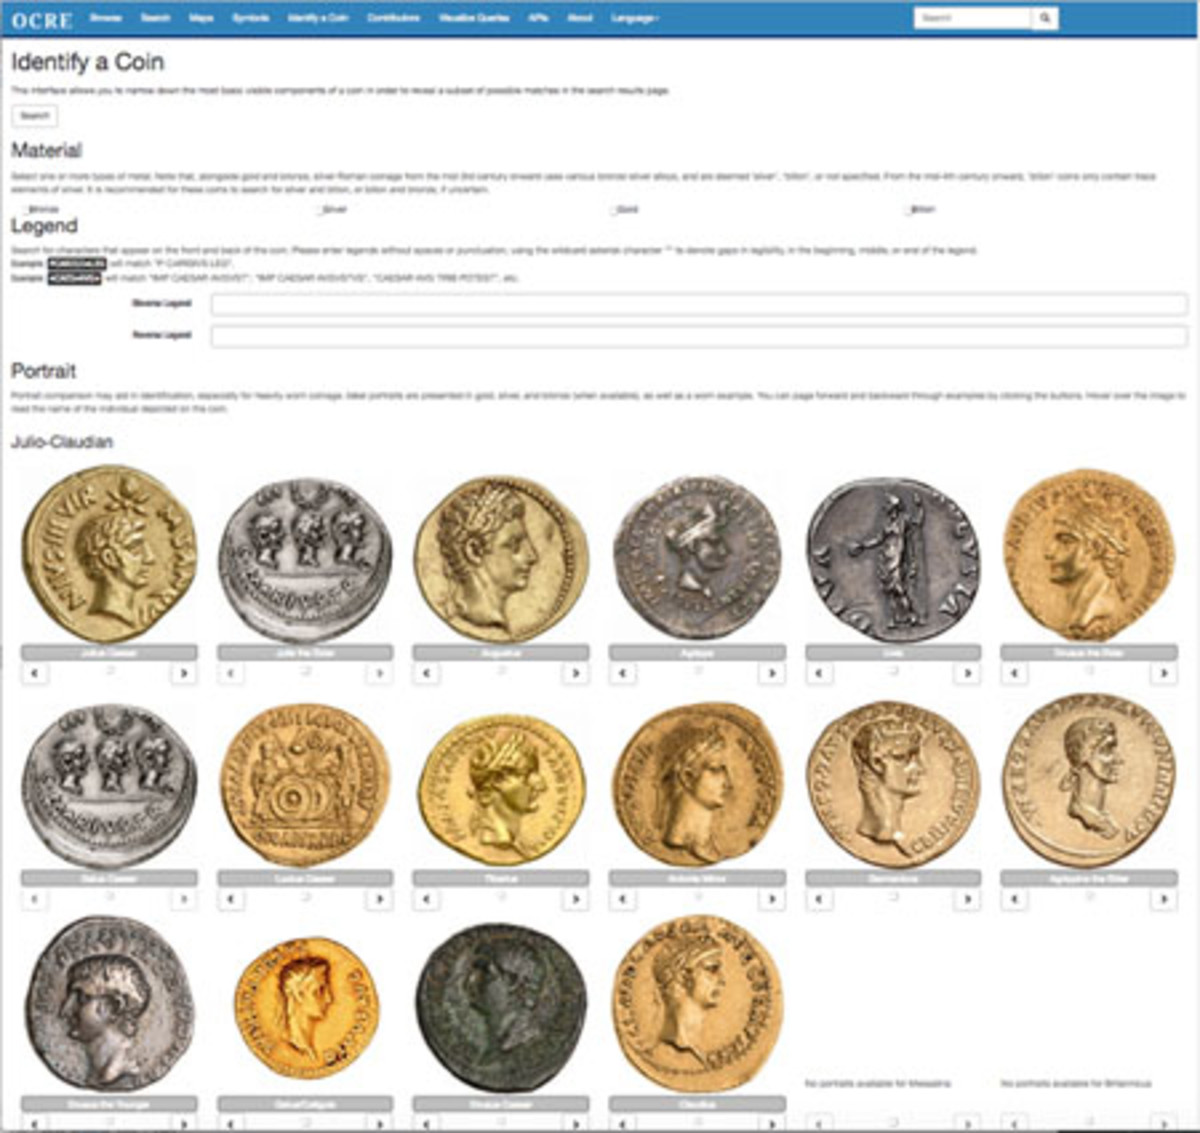 American Numismatic Society: Browse Collection